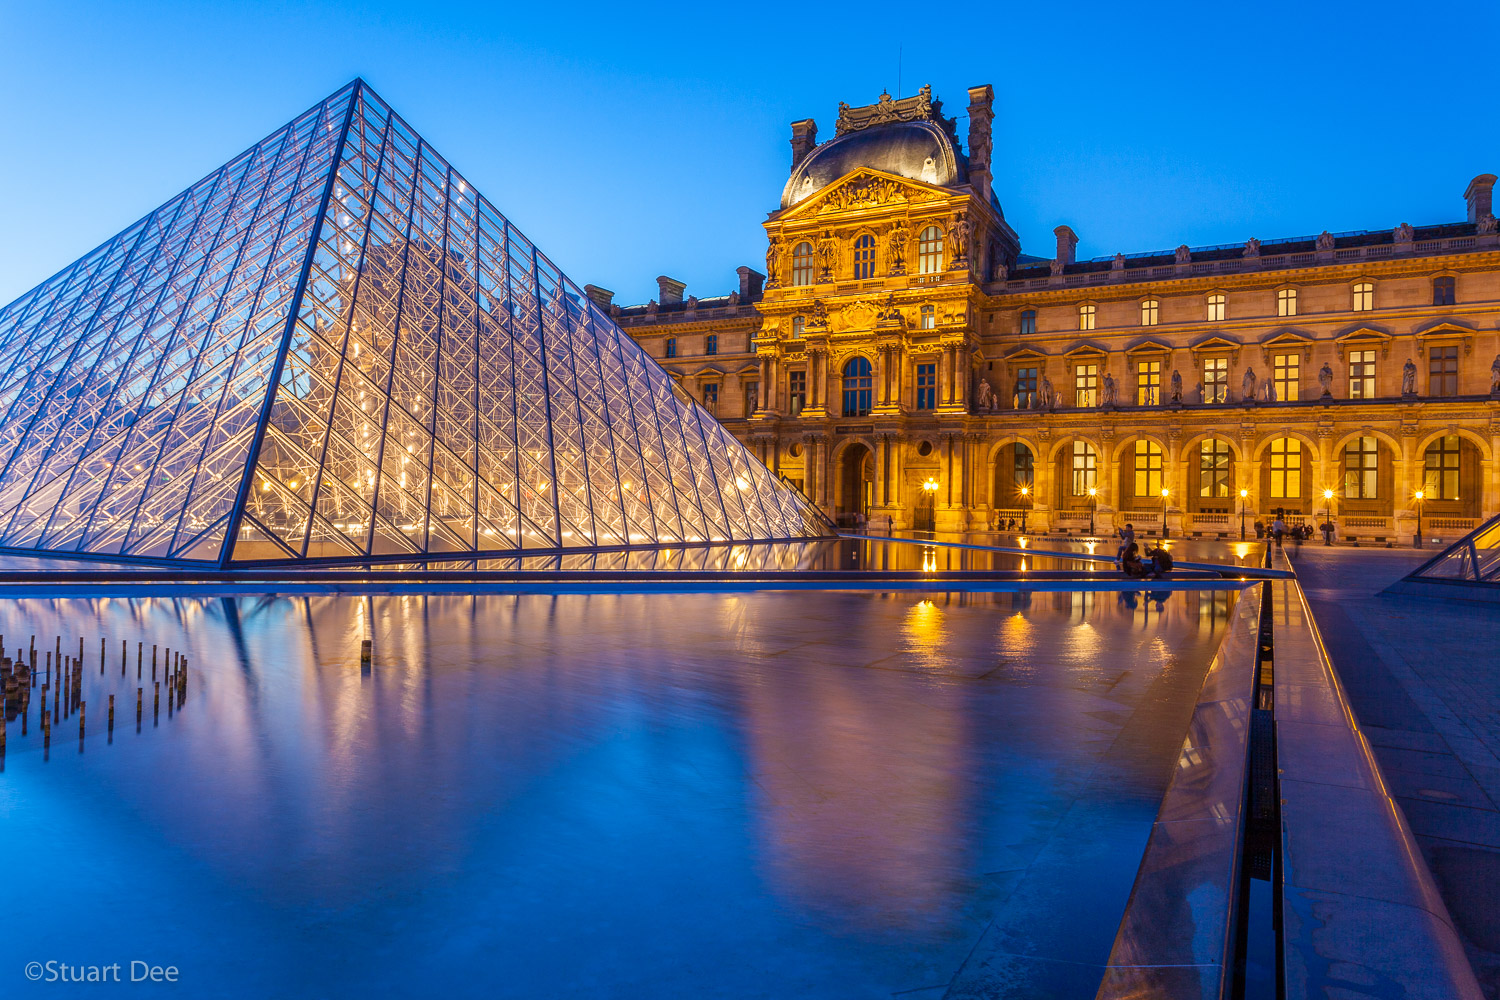  Louvre Museum and Pyramid at twilight/night, Paris, France. The Louvre is one of the most important and is the most visited art museum in the world. 